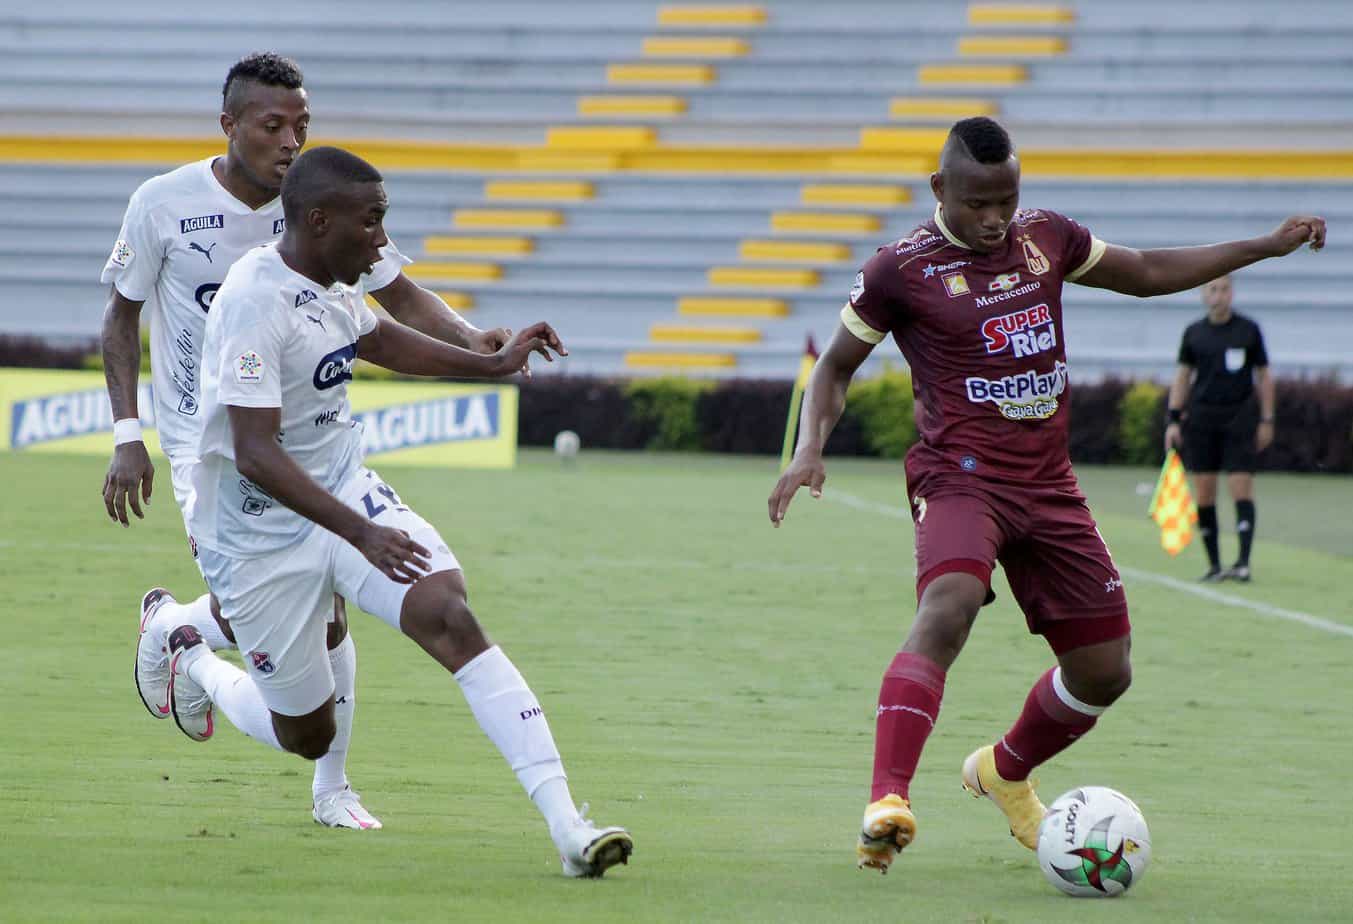 Deportes Tolima vs. DIM – Betting Odds and Free Pick